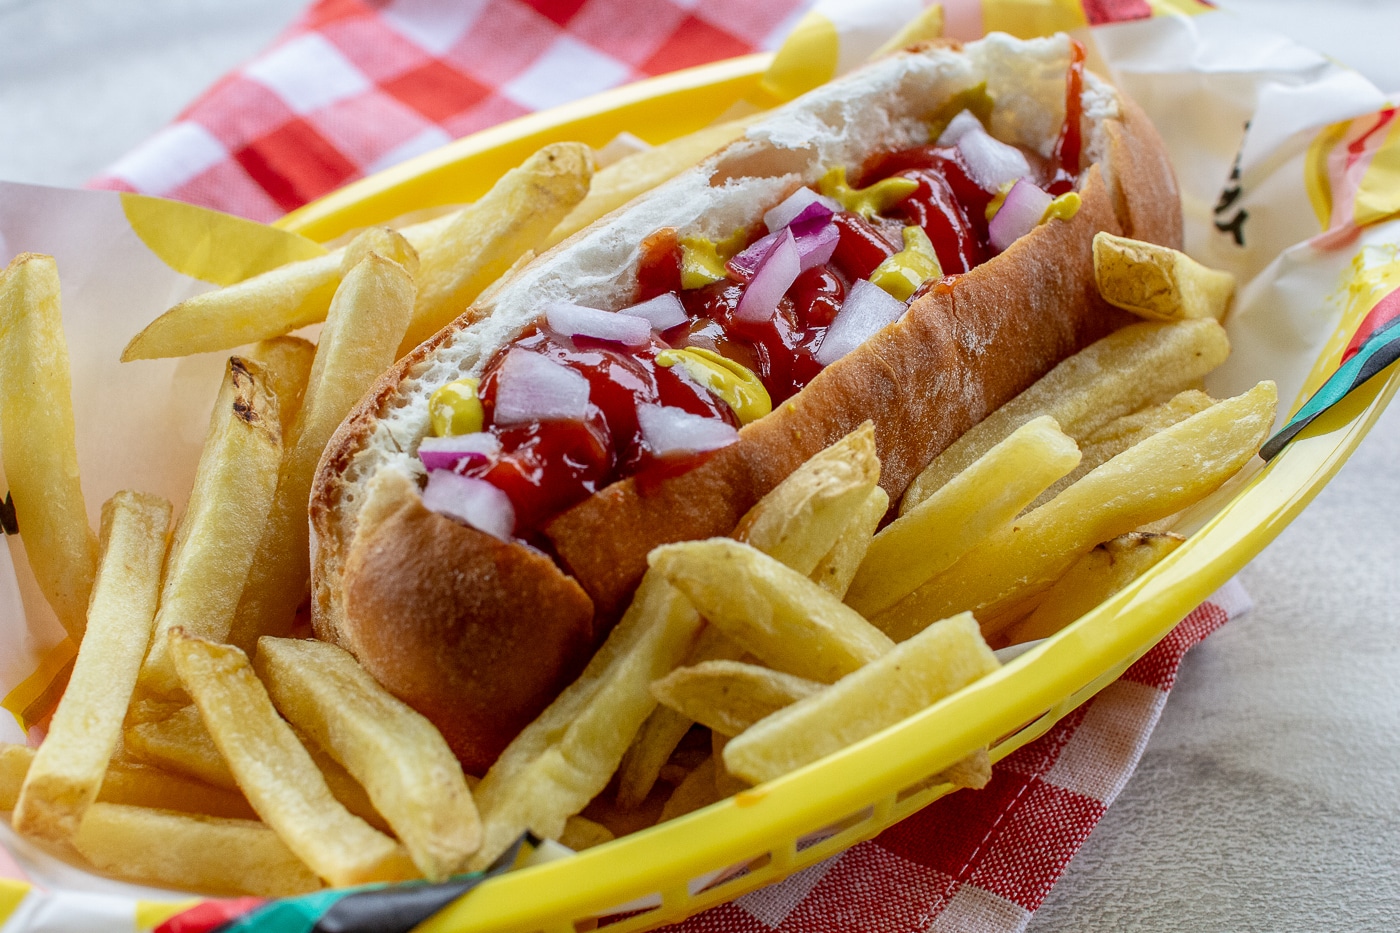 Air fried hot dog in bun topped with onion and ketchup